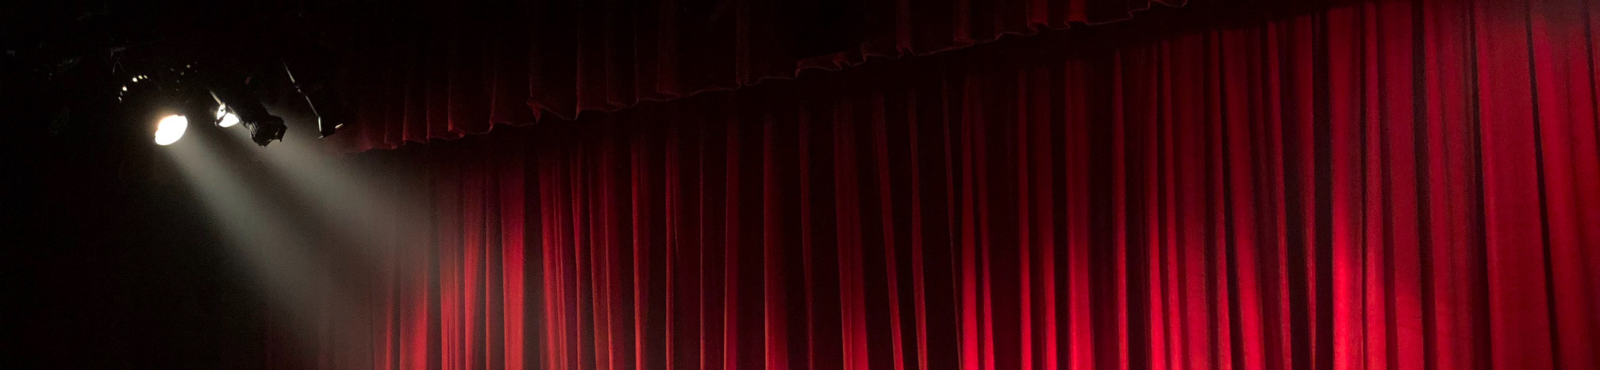 Theater Curtain with Lights Background Image